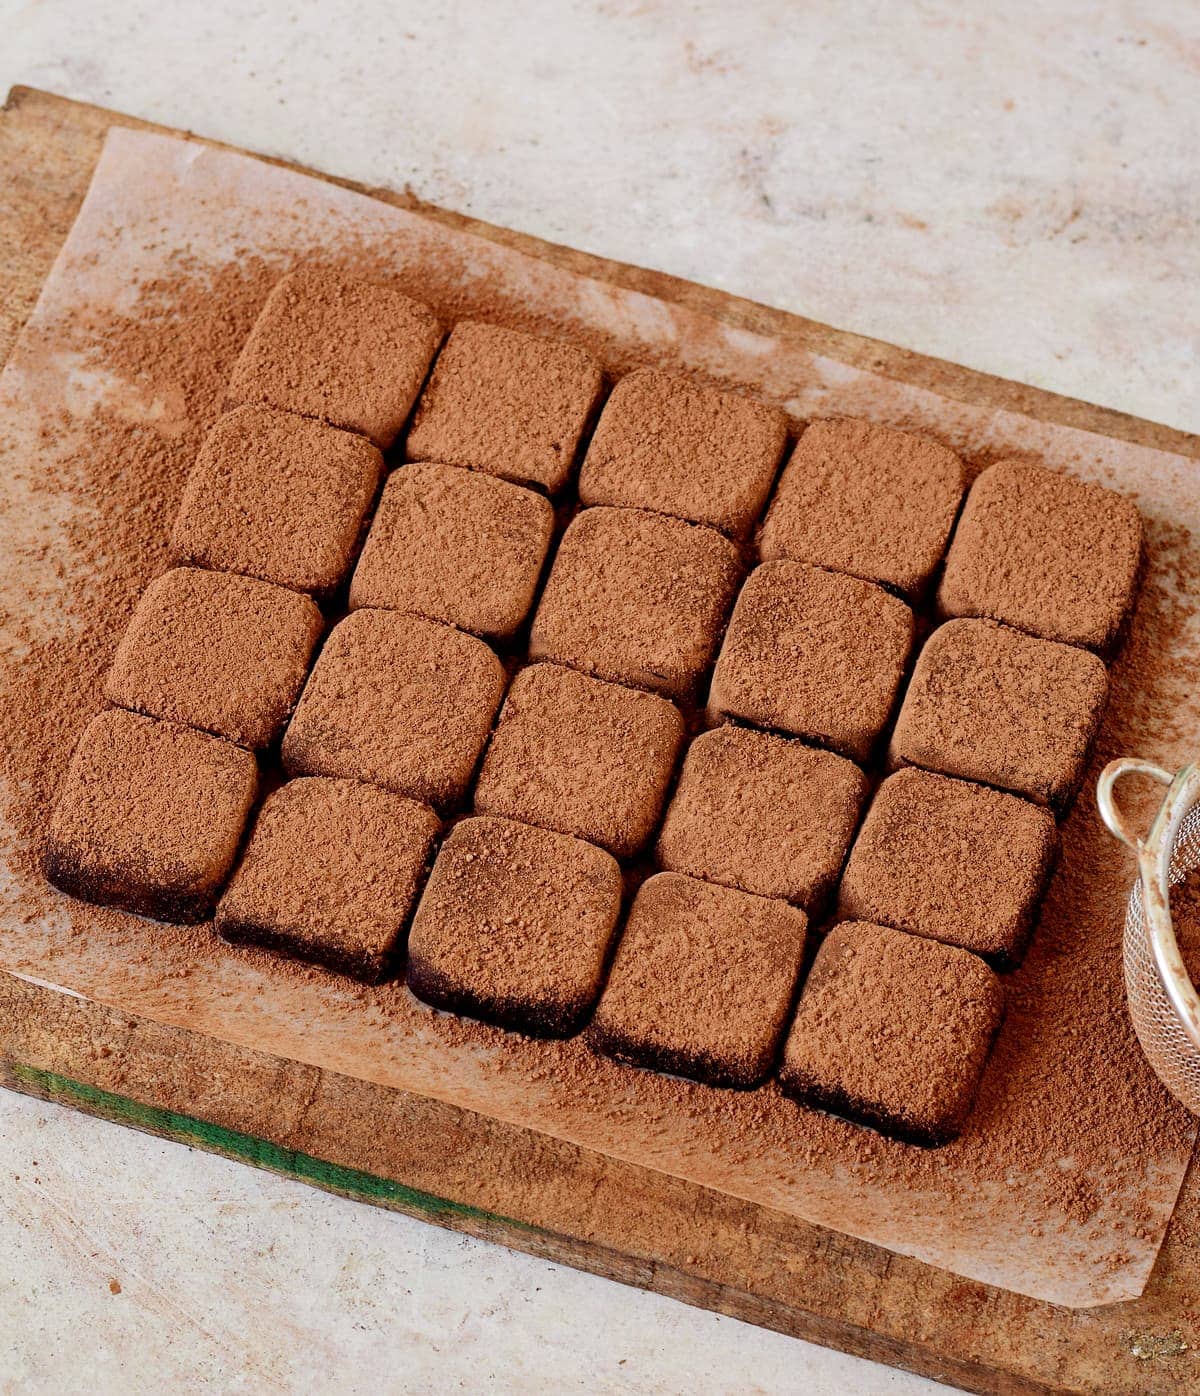 homemade condensed milk truffles with cocoa powder on wooden board